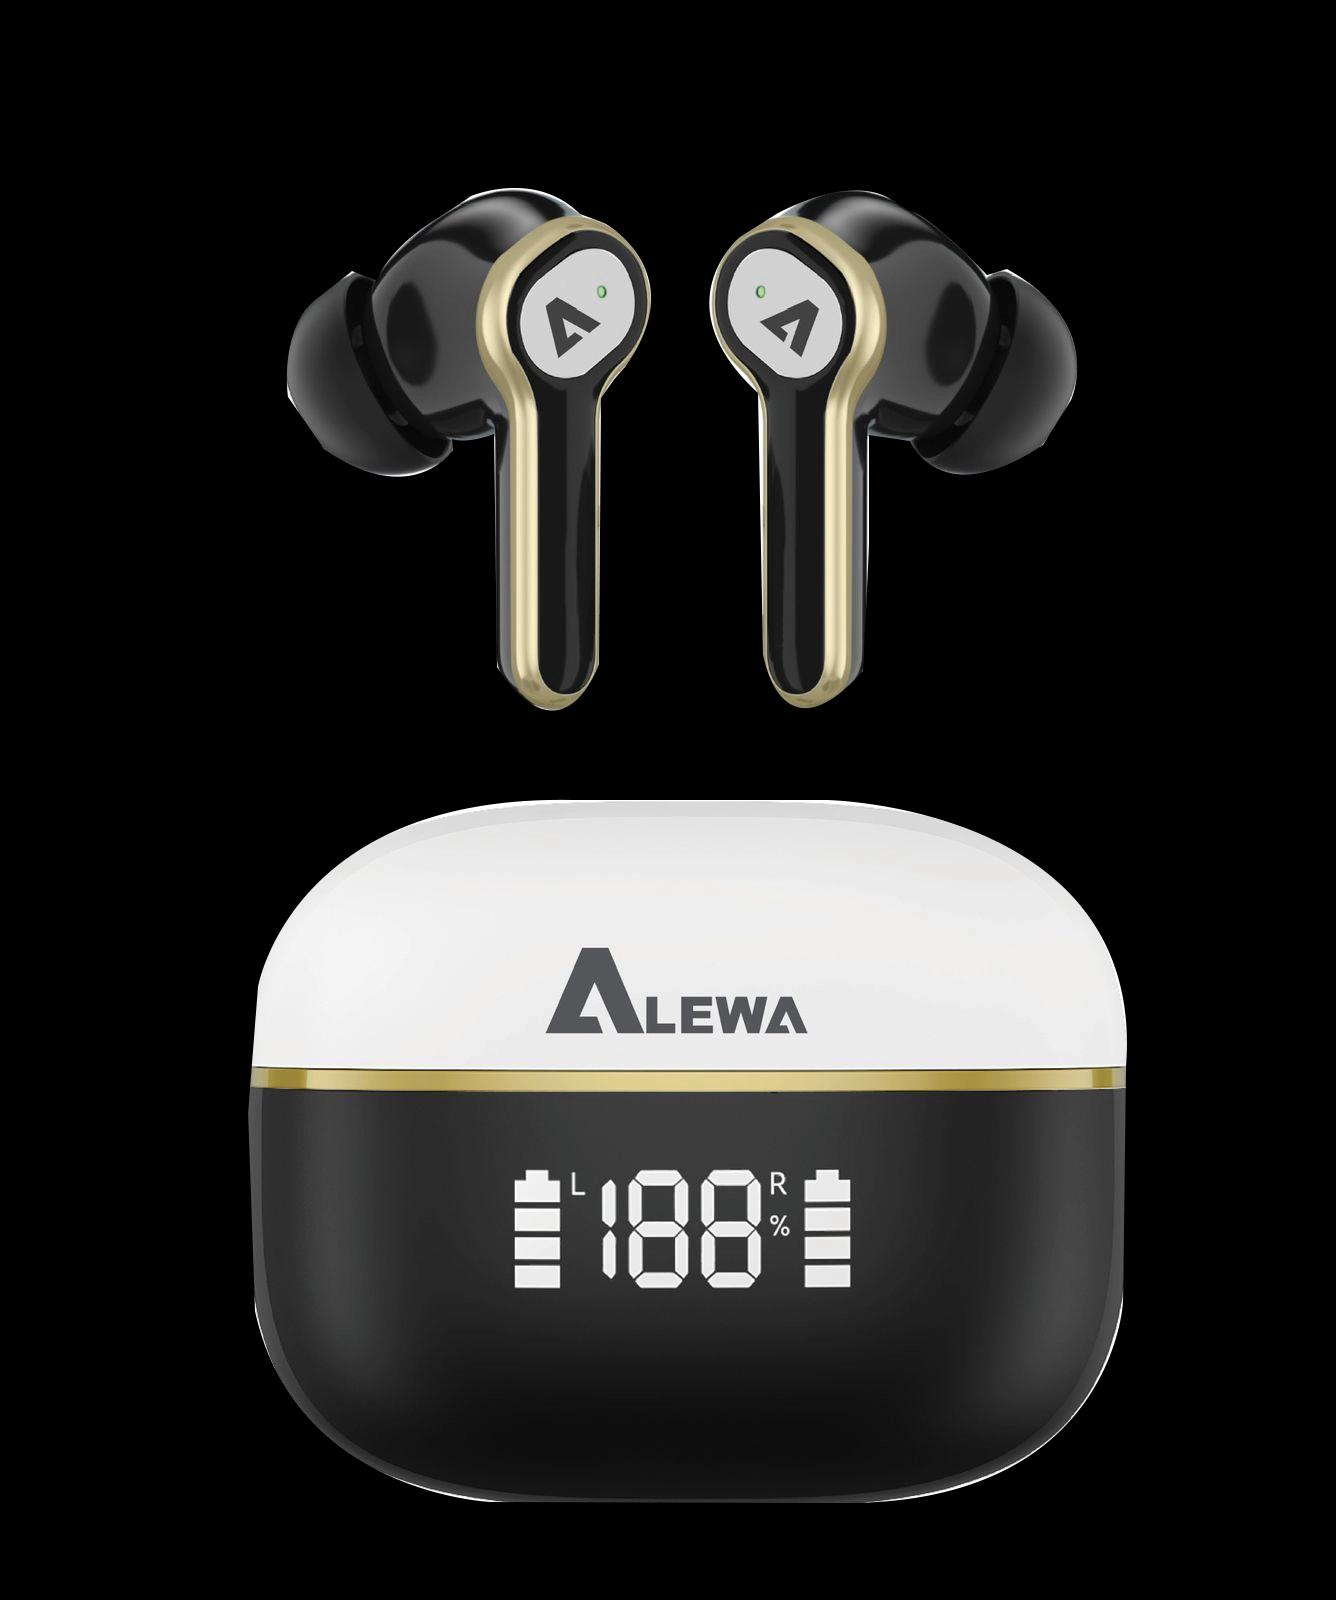 Alewa BassBuds 3 Equalizer Modes, 4 Mics Clear Calling, 50ms Low Latency Gaming, Bluetooth 5.3 True Wireless In Ear Earbuds | Digital Display